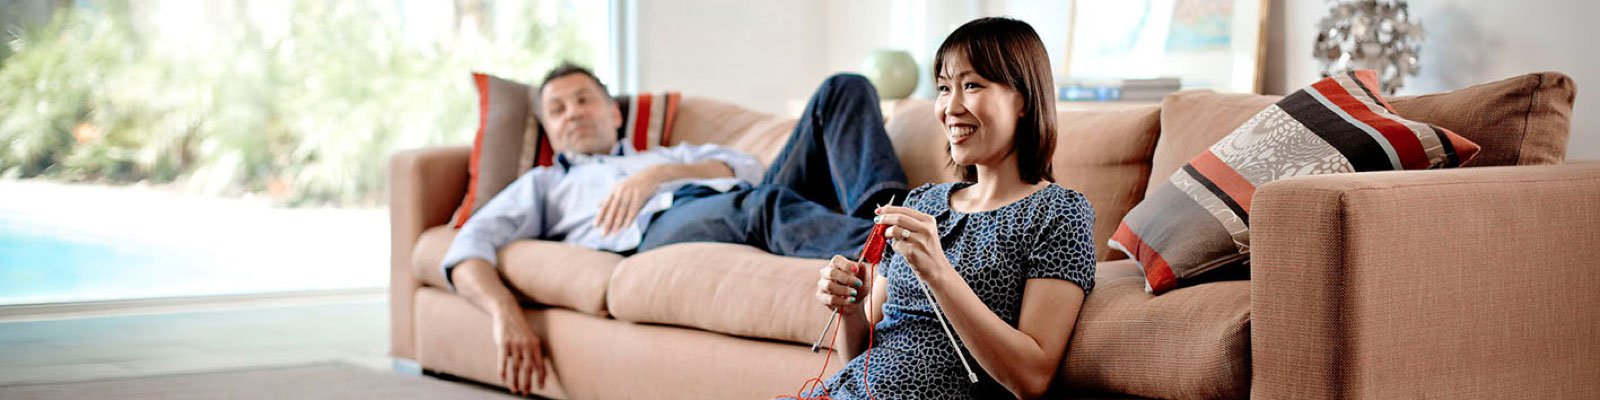 woman knitting and man lying down on couch